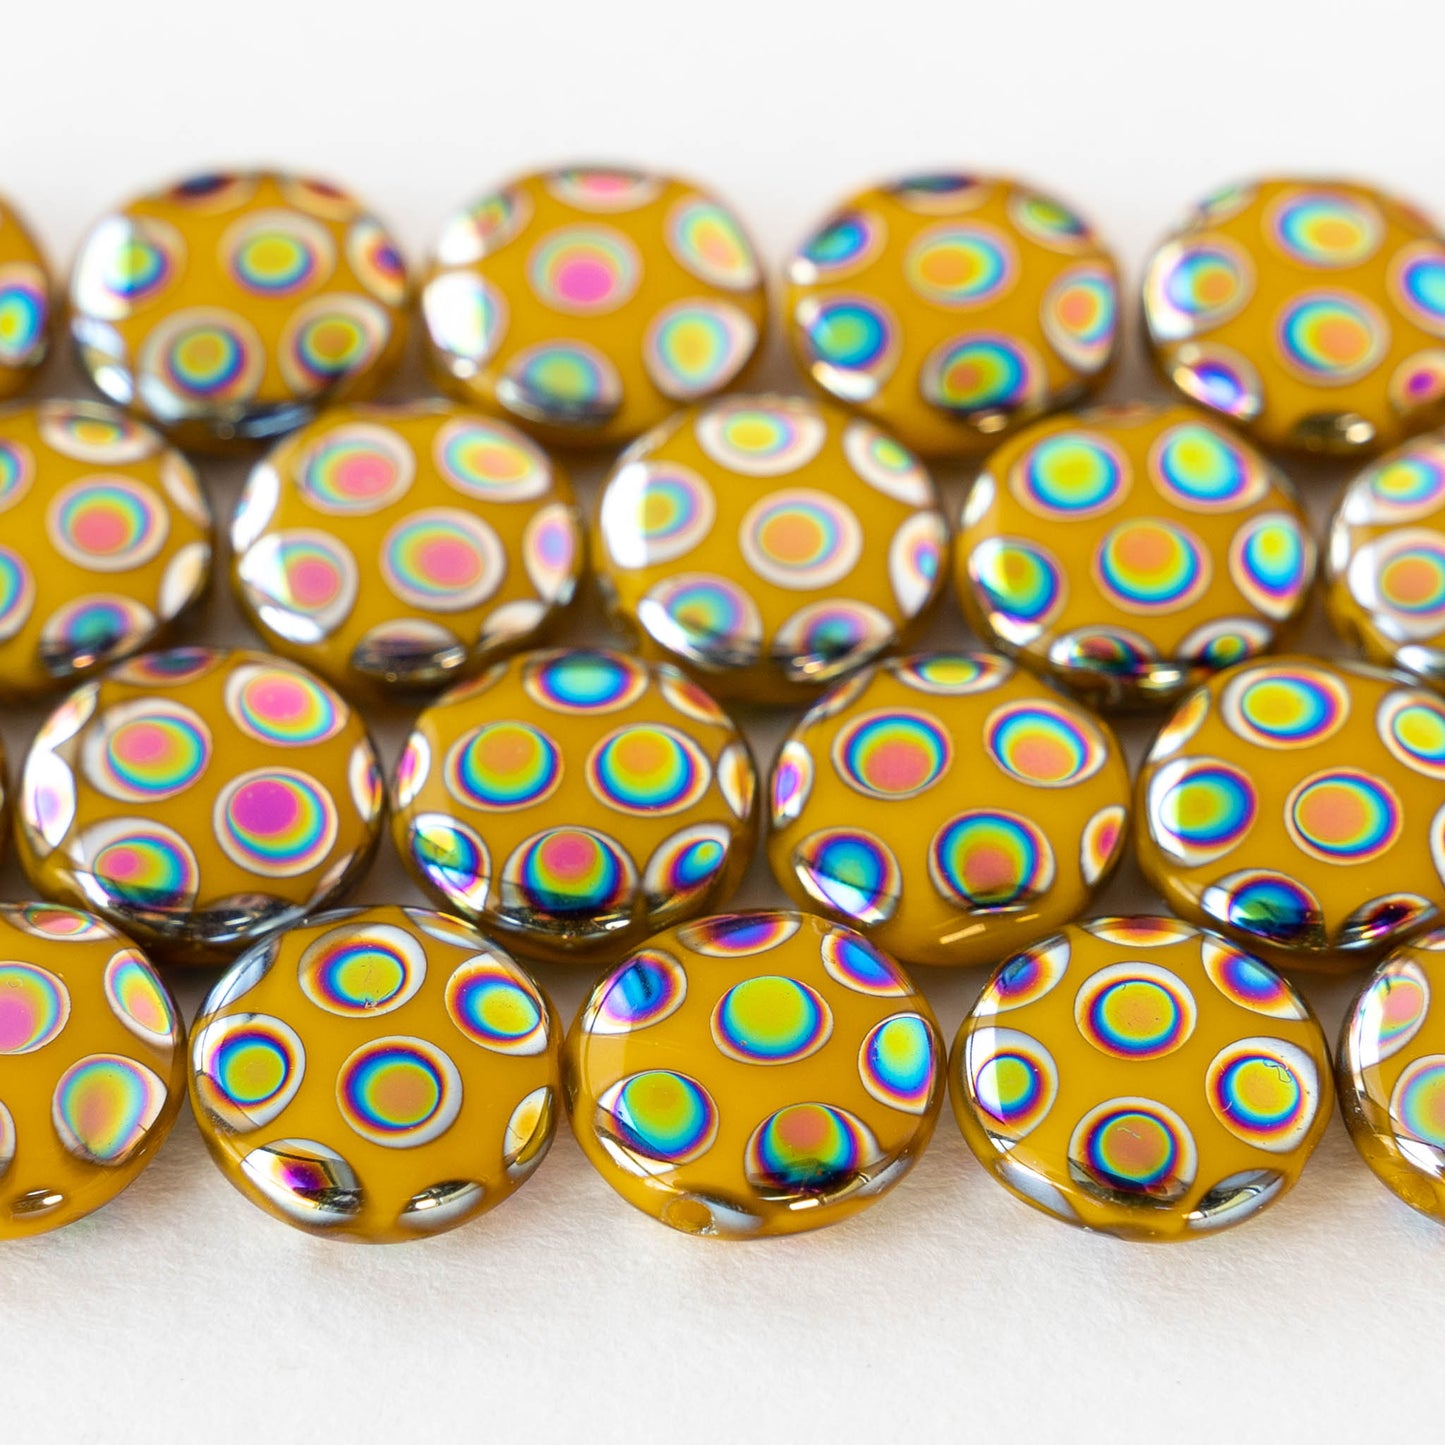 11mm Glass Coin - Yellow With Peacock Finish - 4 beads